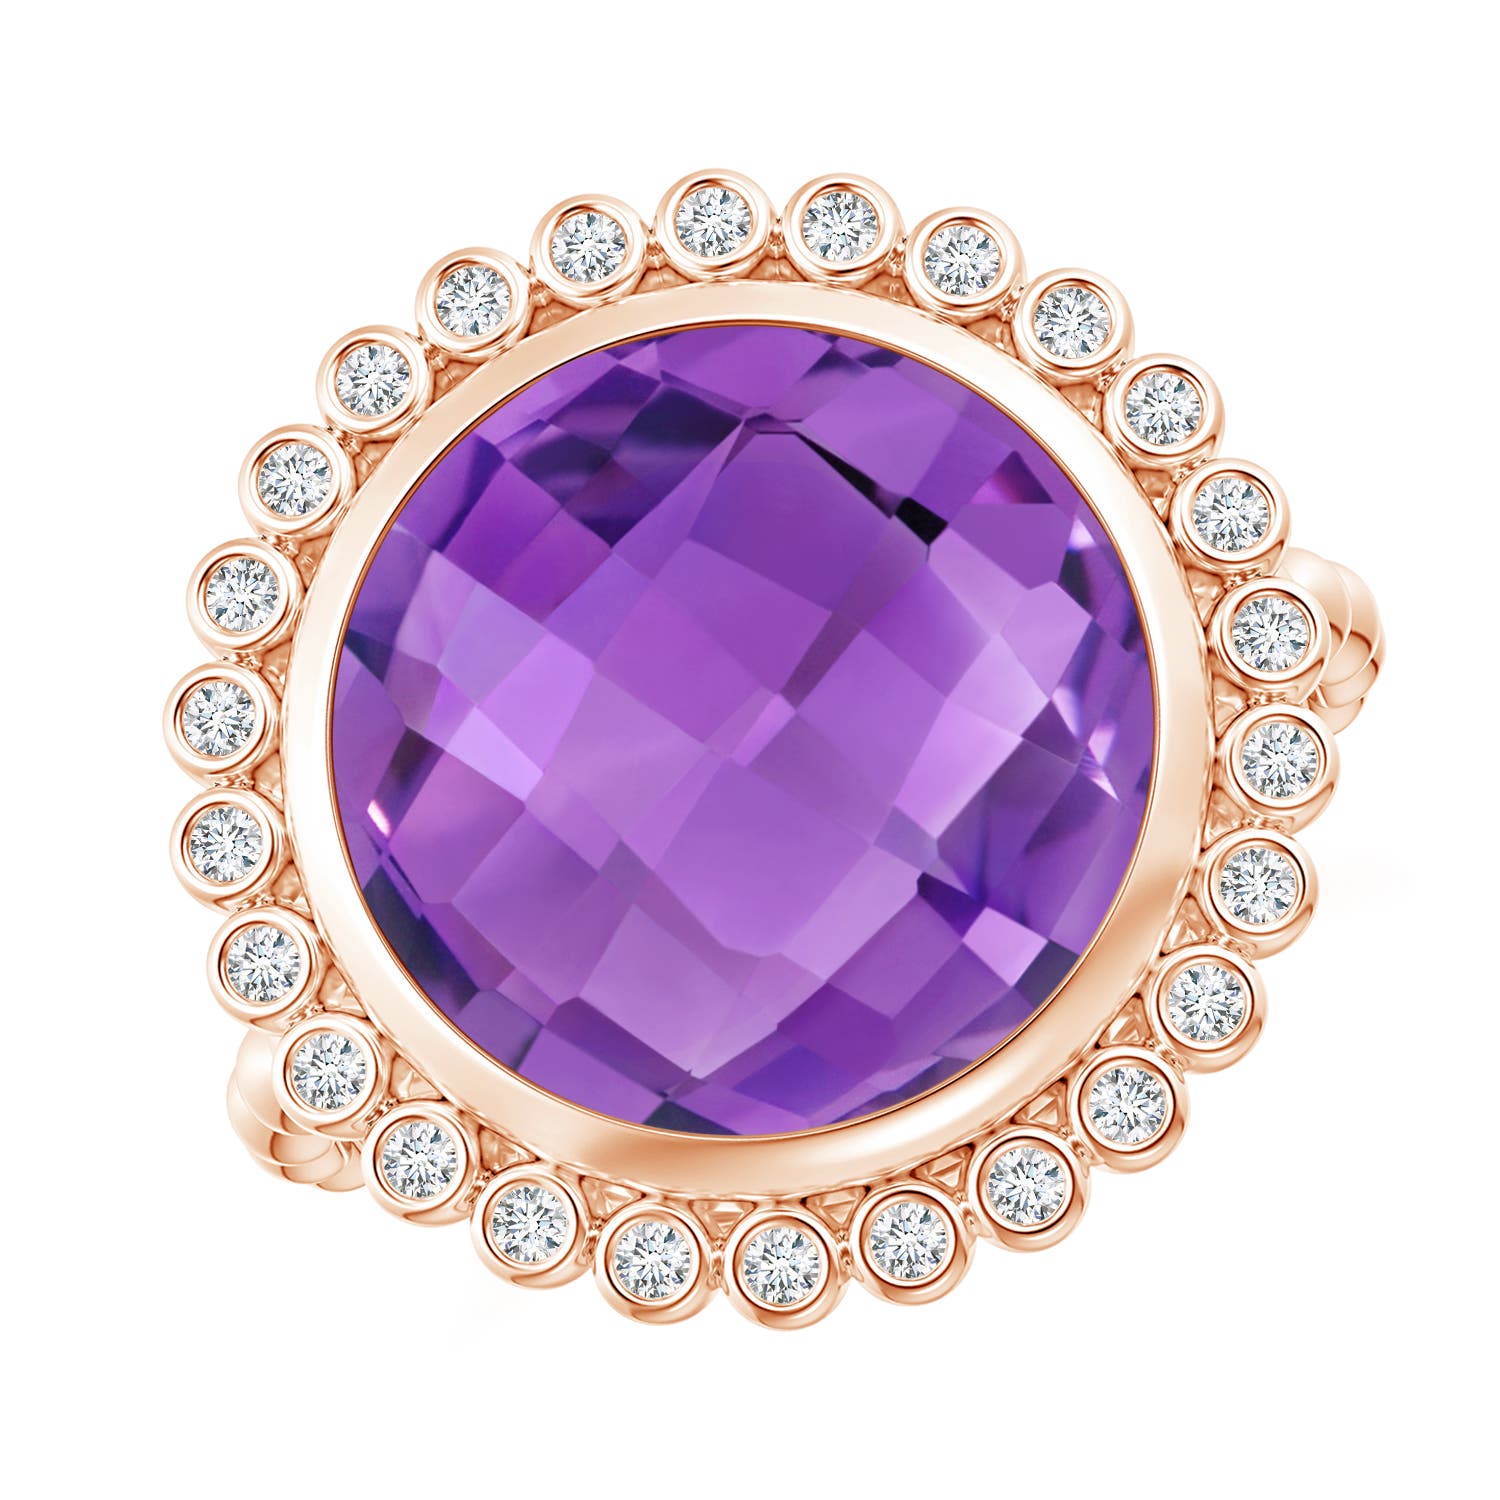 AA - Amethyst / 5.71 CT / 14 KT Rose Gold